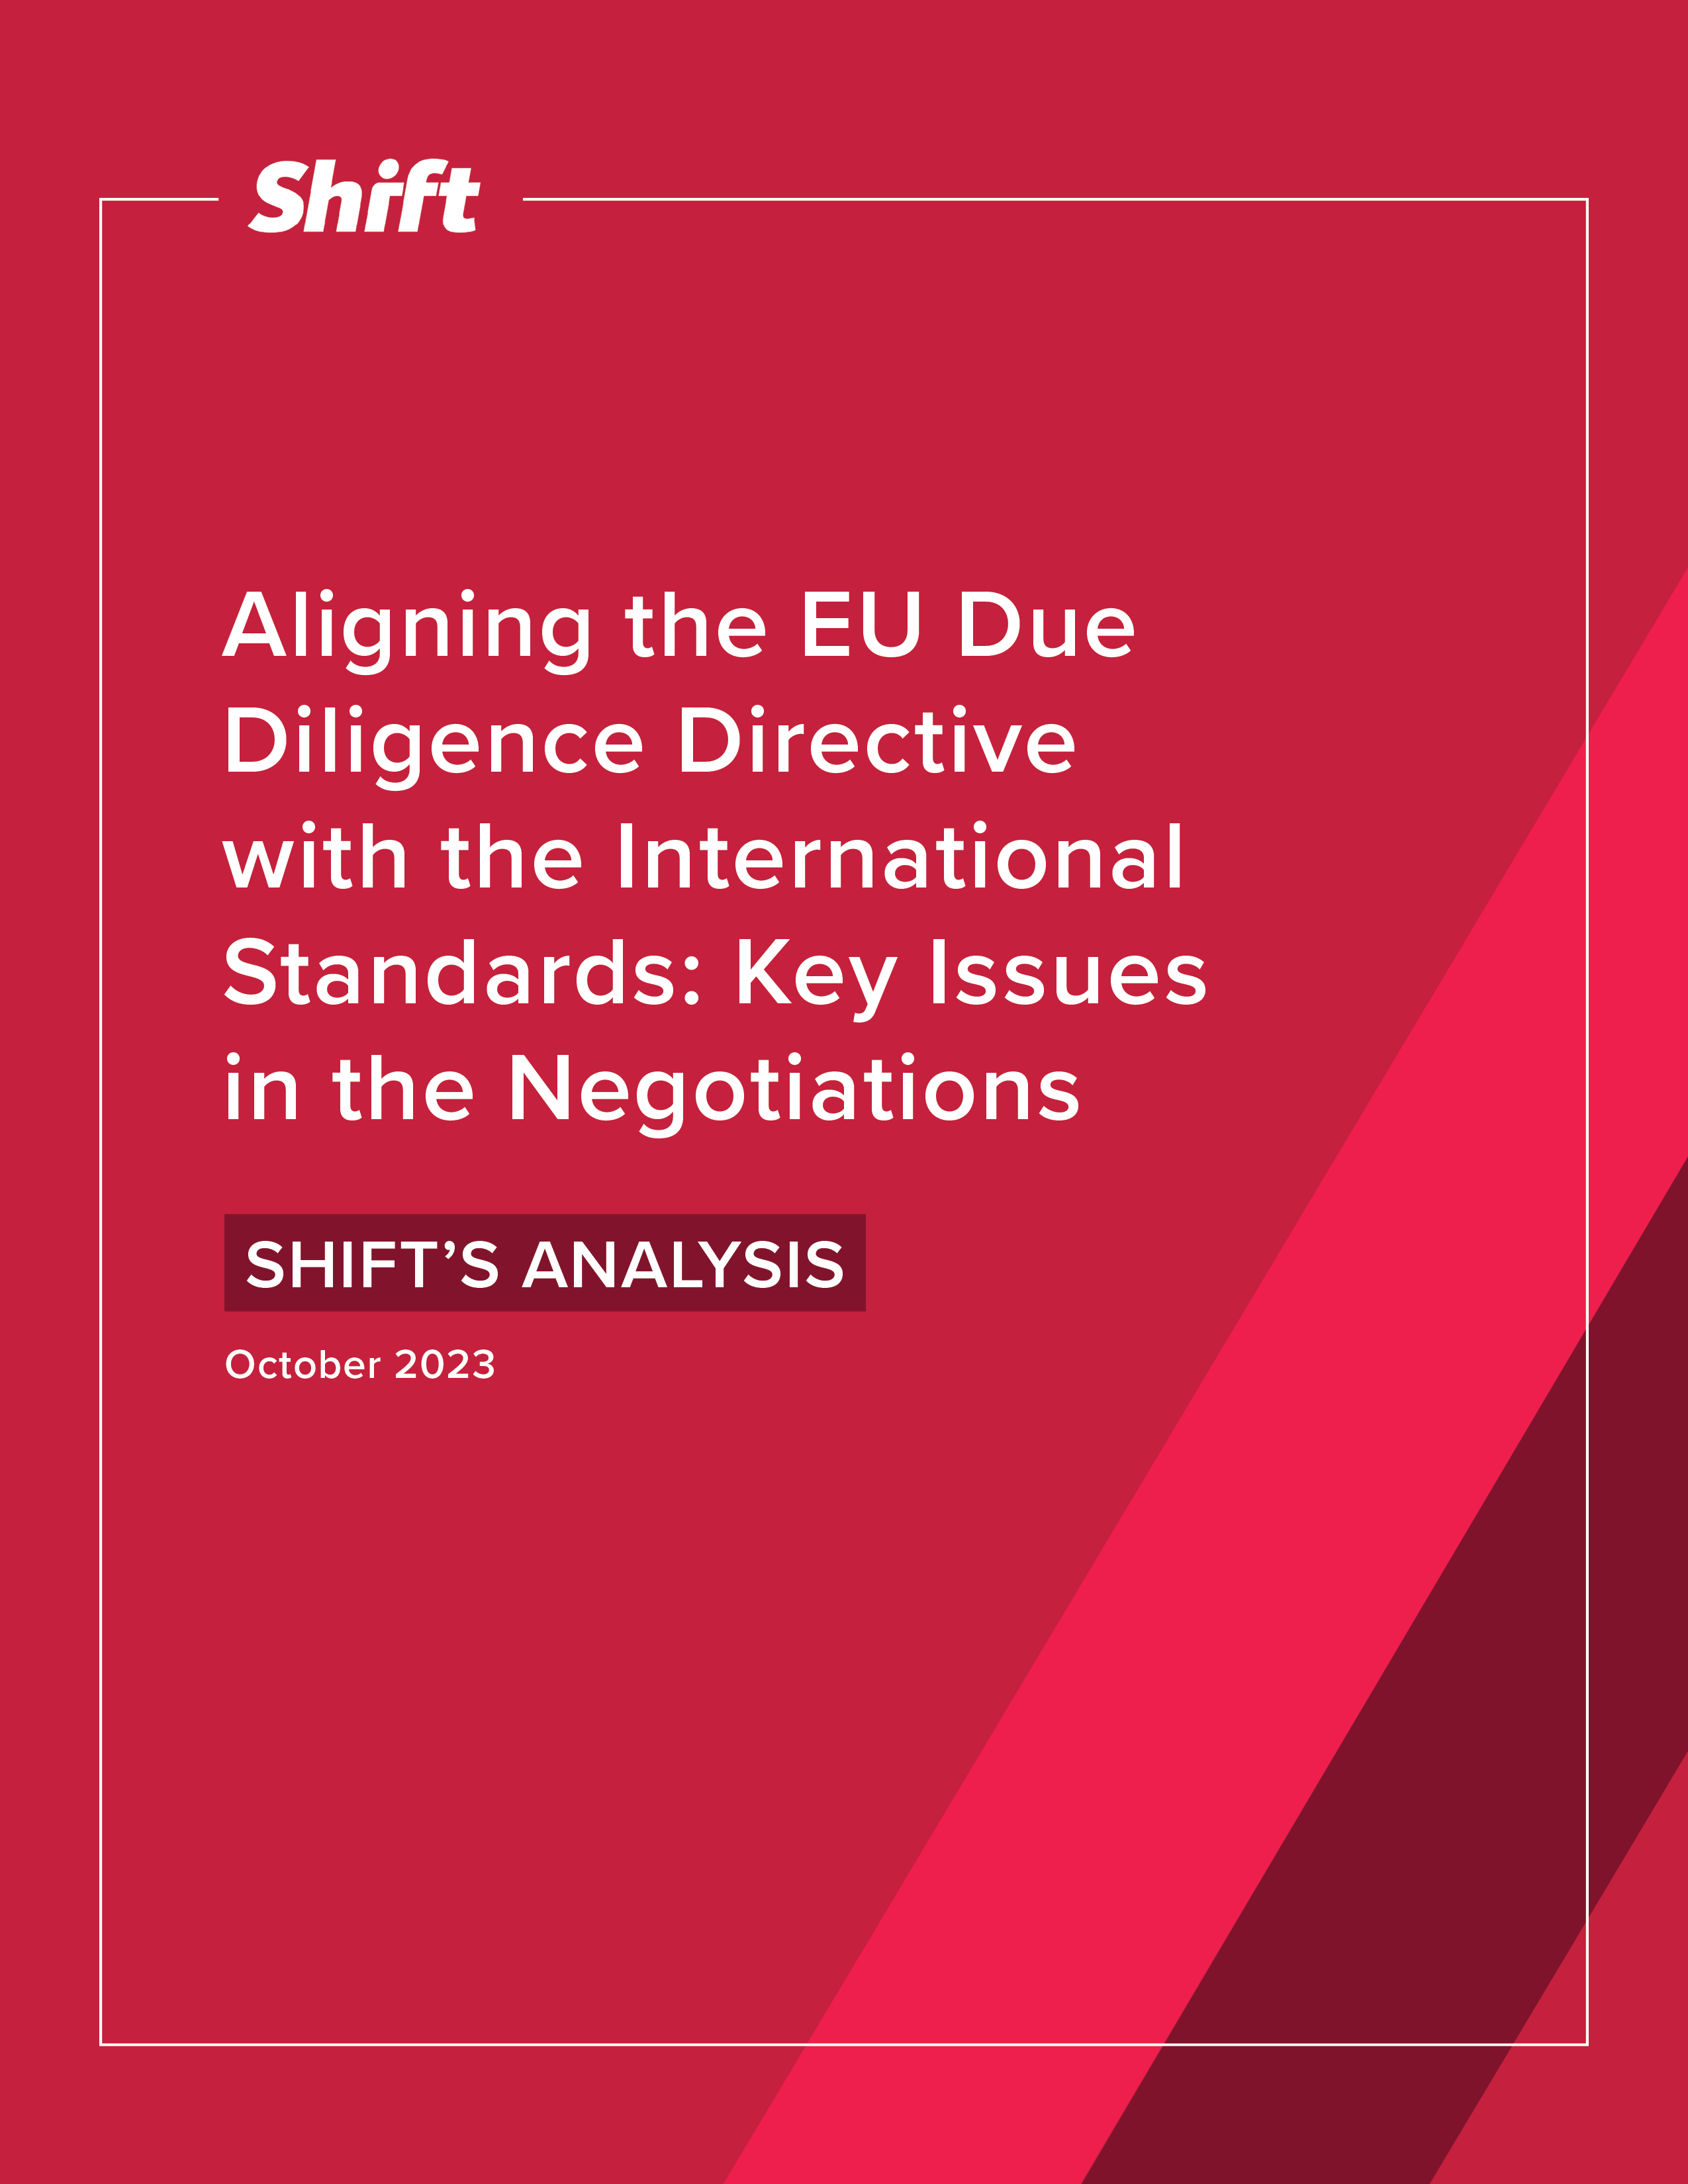 Aligning the EU Due Diligence Directive with the International Standards: Key Issues in the Negotiations